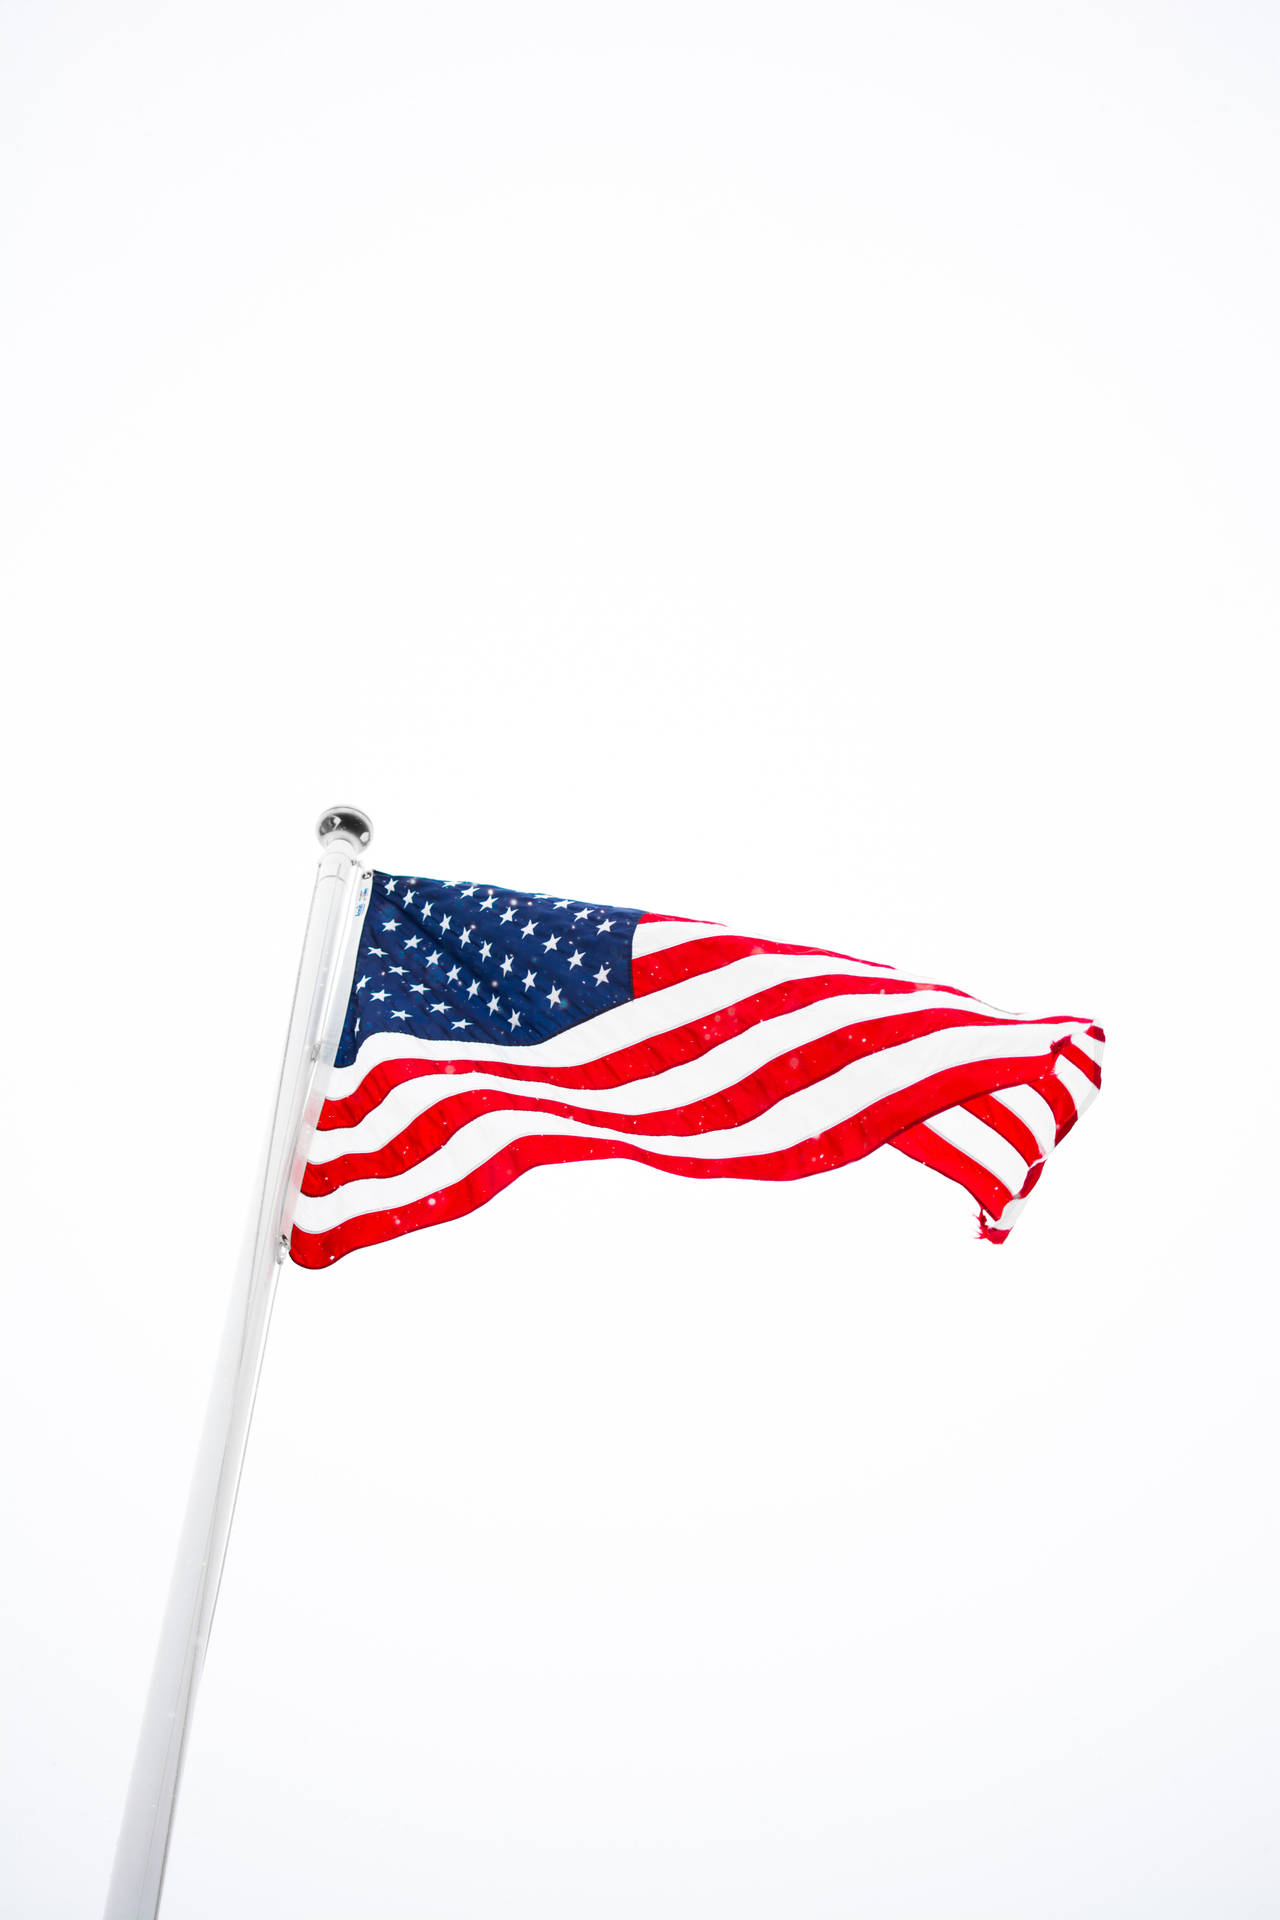 4000X6000 American Flag Wallpaper and Background